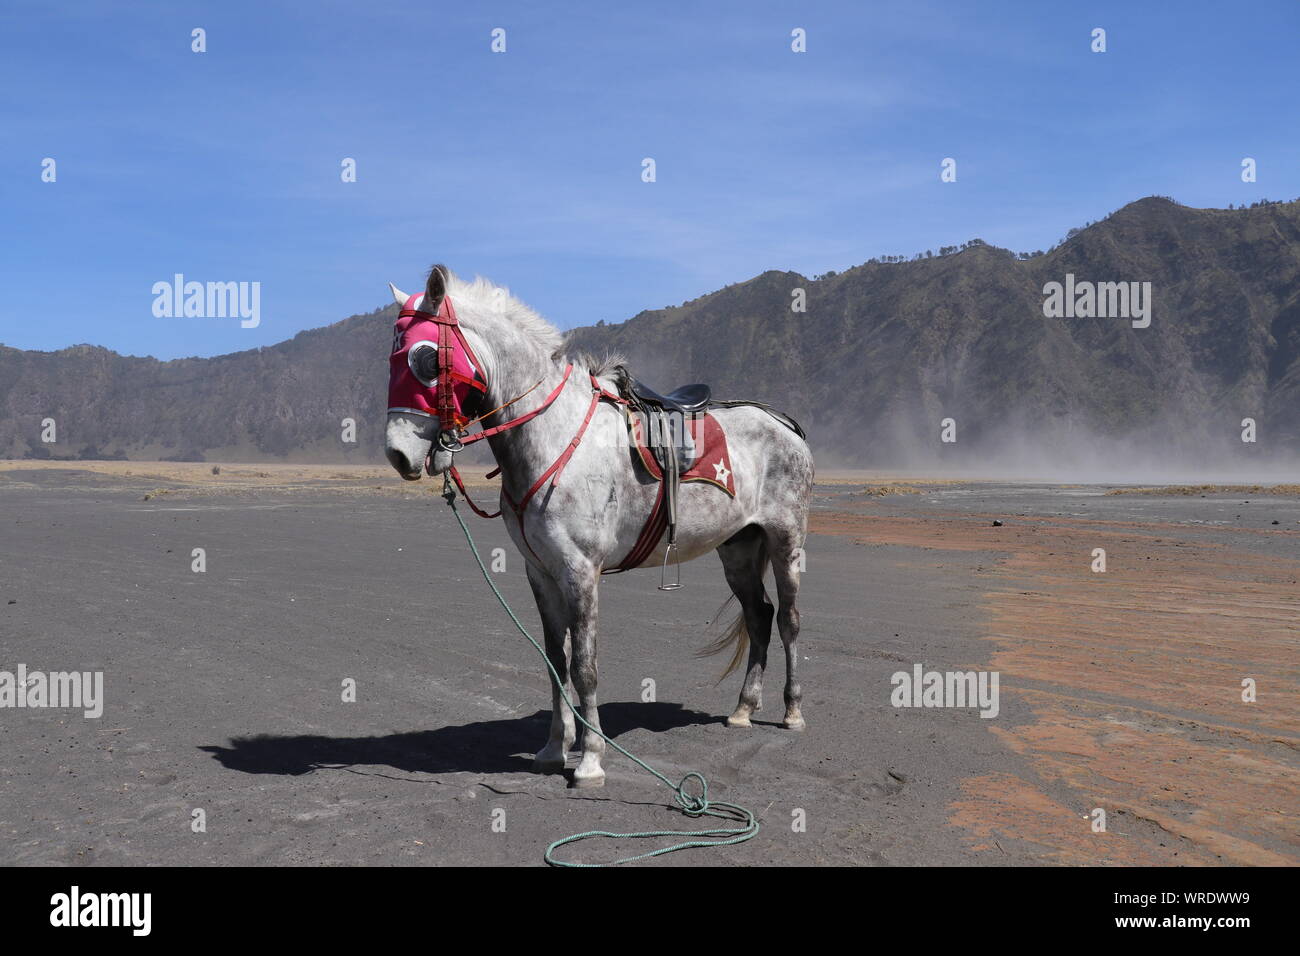 A saddled roan horse stands on a sandy plain with dry grass in the Bromo Valley. Stallion with red harness gazing at a nearby mountain range. Stock Photo